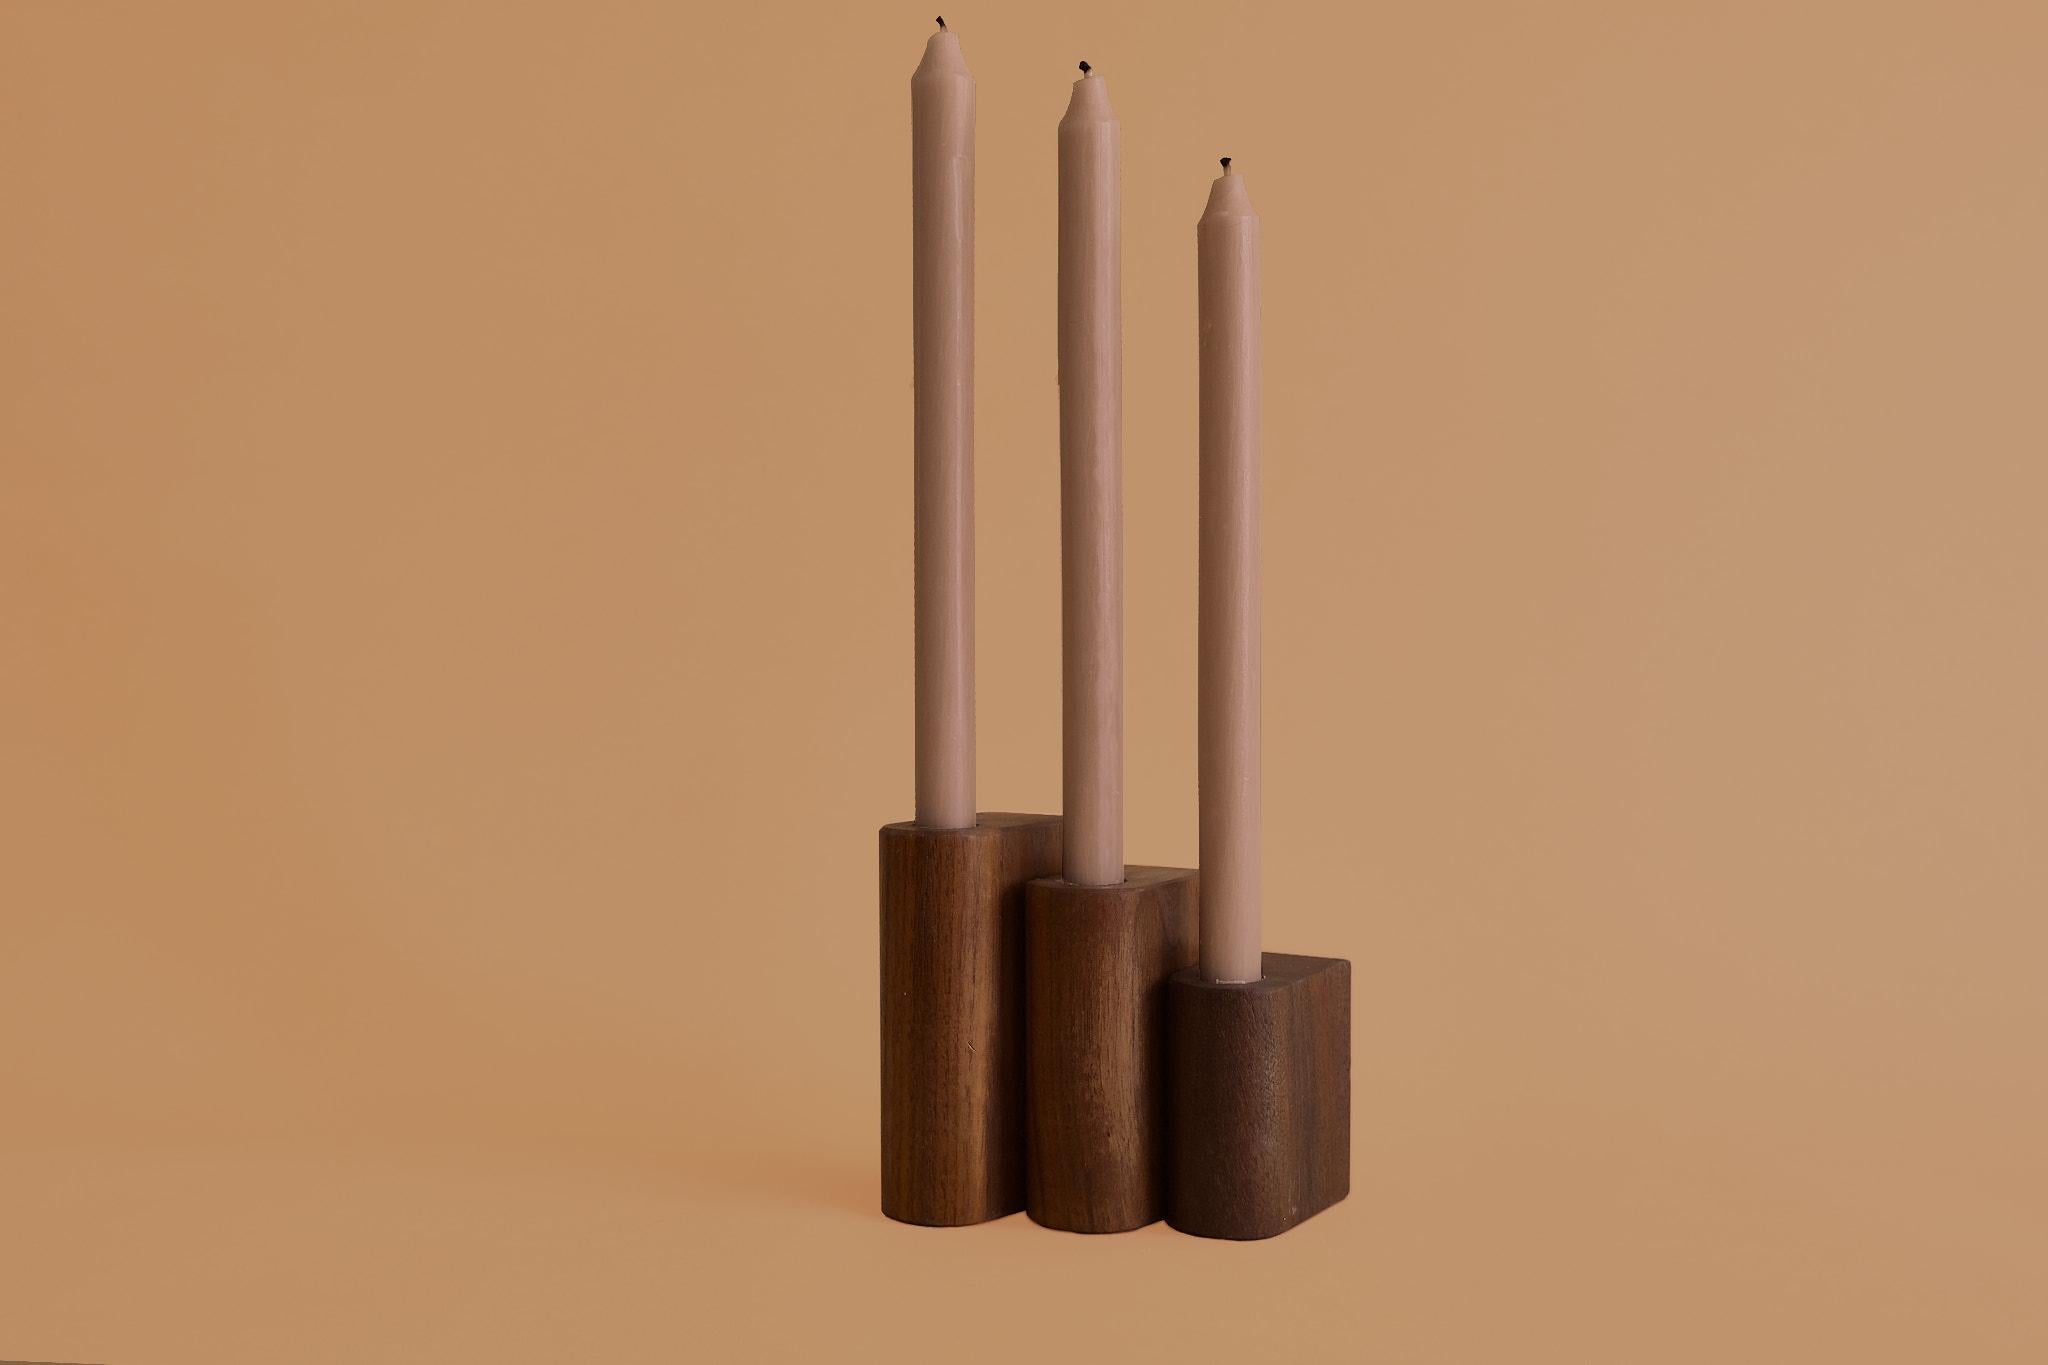 There's something about candlelit dinners that fuels meandering conversation late into the evening. Minimalist, sculptural forms, the Cusp Candleholders set a warm, cozy vibe even when not in use. We recommend using them though, because nothing sets